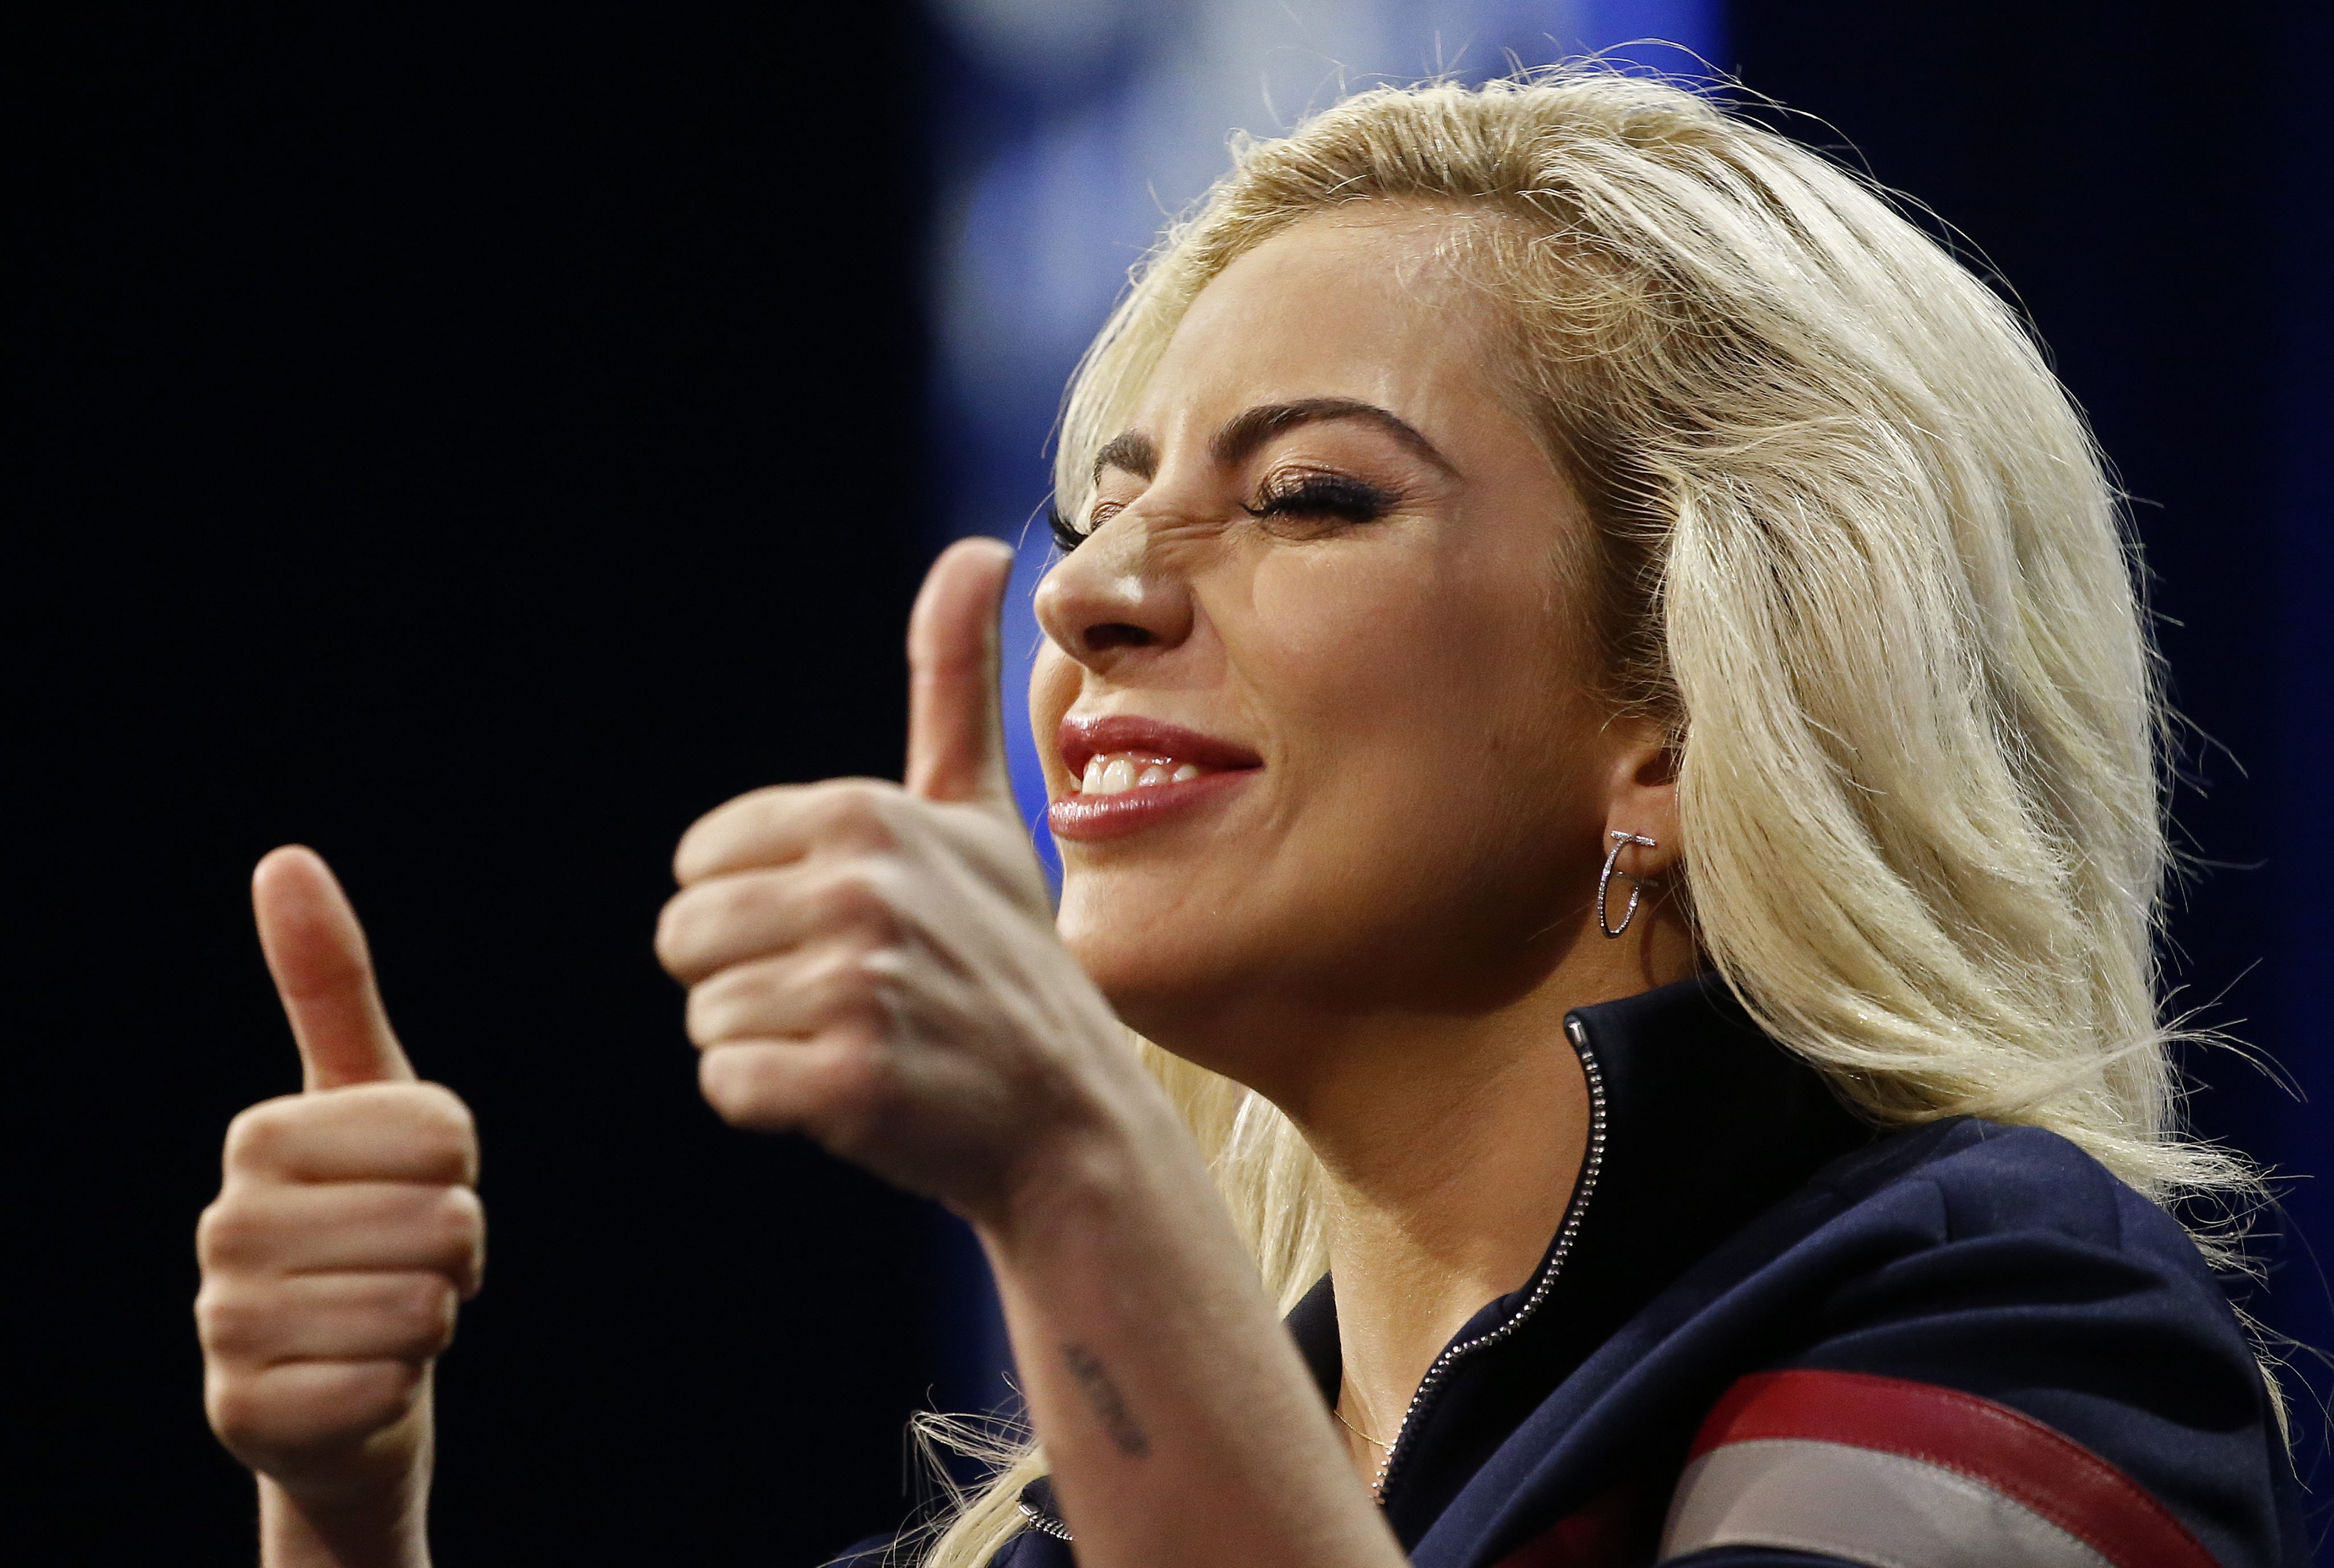 2017-02-02 15:28:24 epa05767258 US singer-songwriter Lady Gaga responds to questions during the Super Bowl LI Halftime Show press conference at the George R. Brown Convention Center in Houston, Texas, 02 February 2017. Super Bowl LI will be played at NRG Stadium on 05 February 2017 between the NFC Champions Atlanta Falcons and the AFC Champions New England Patriots. EPA/LARRY W. SMITH